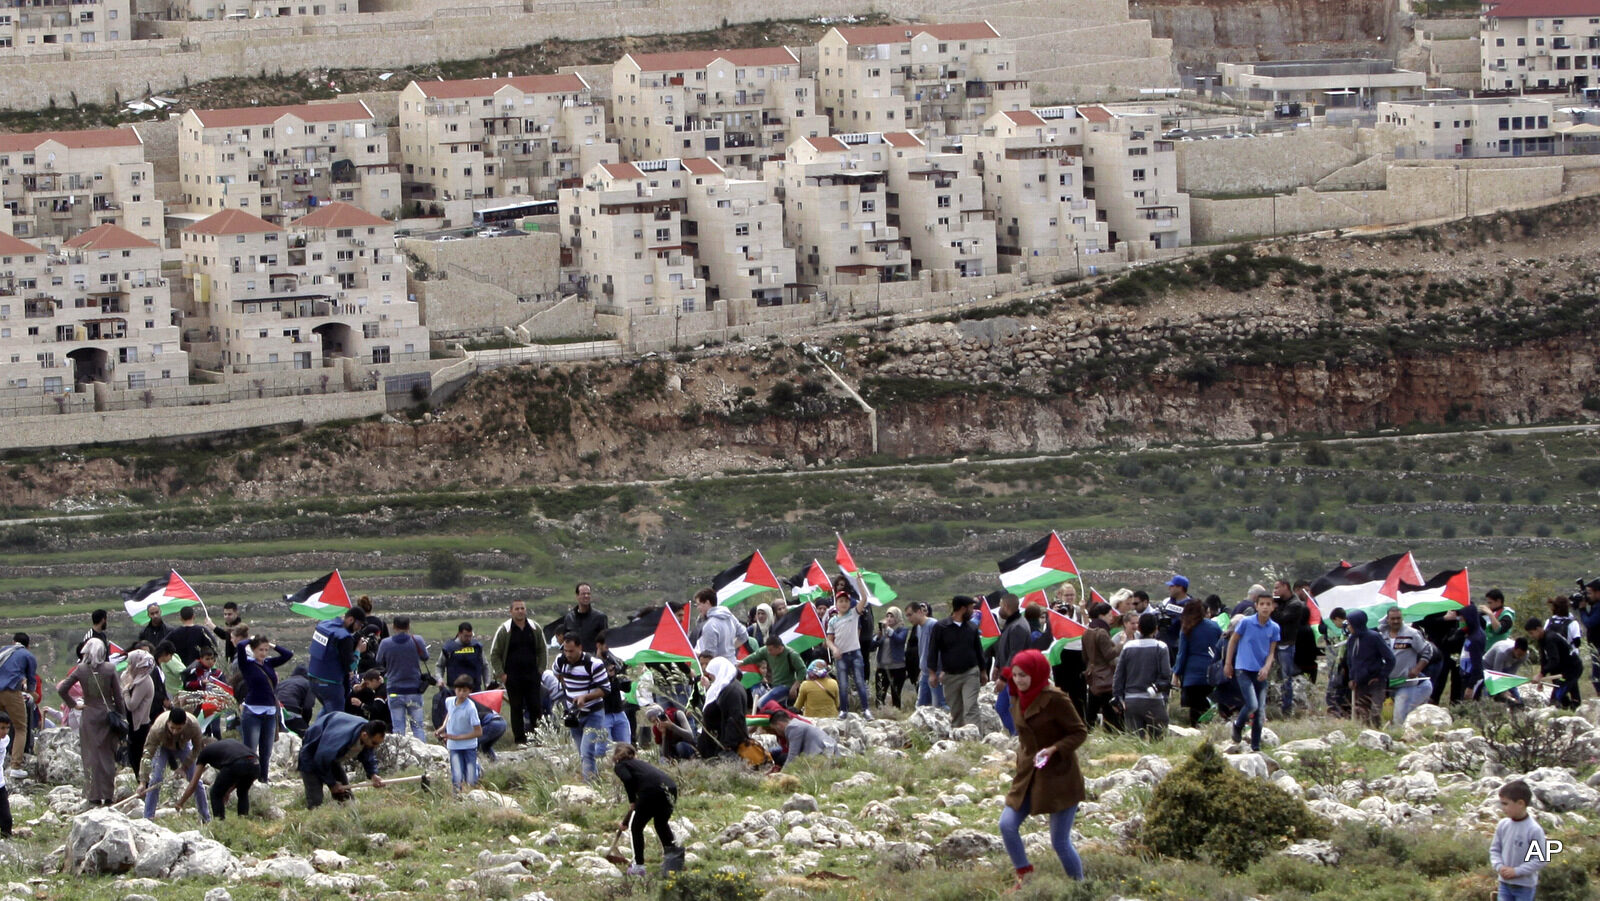 Palestinian protesters carry national flags and plant olive trees facing the Israeli settlement of Beitar Illit during a protest marking Land Day, in the village of Wadi Fukin, near the West Bank city of Bethlehem, Monday, March 30, 2015.